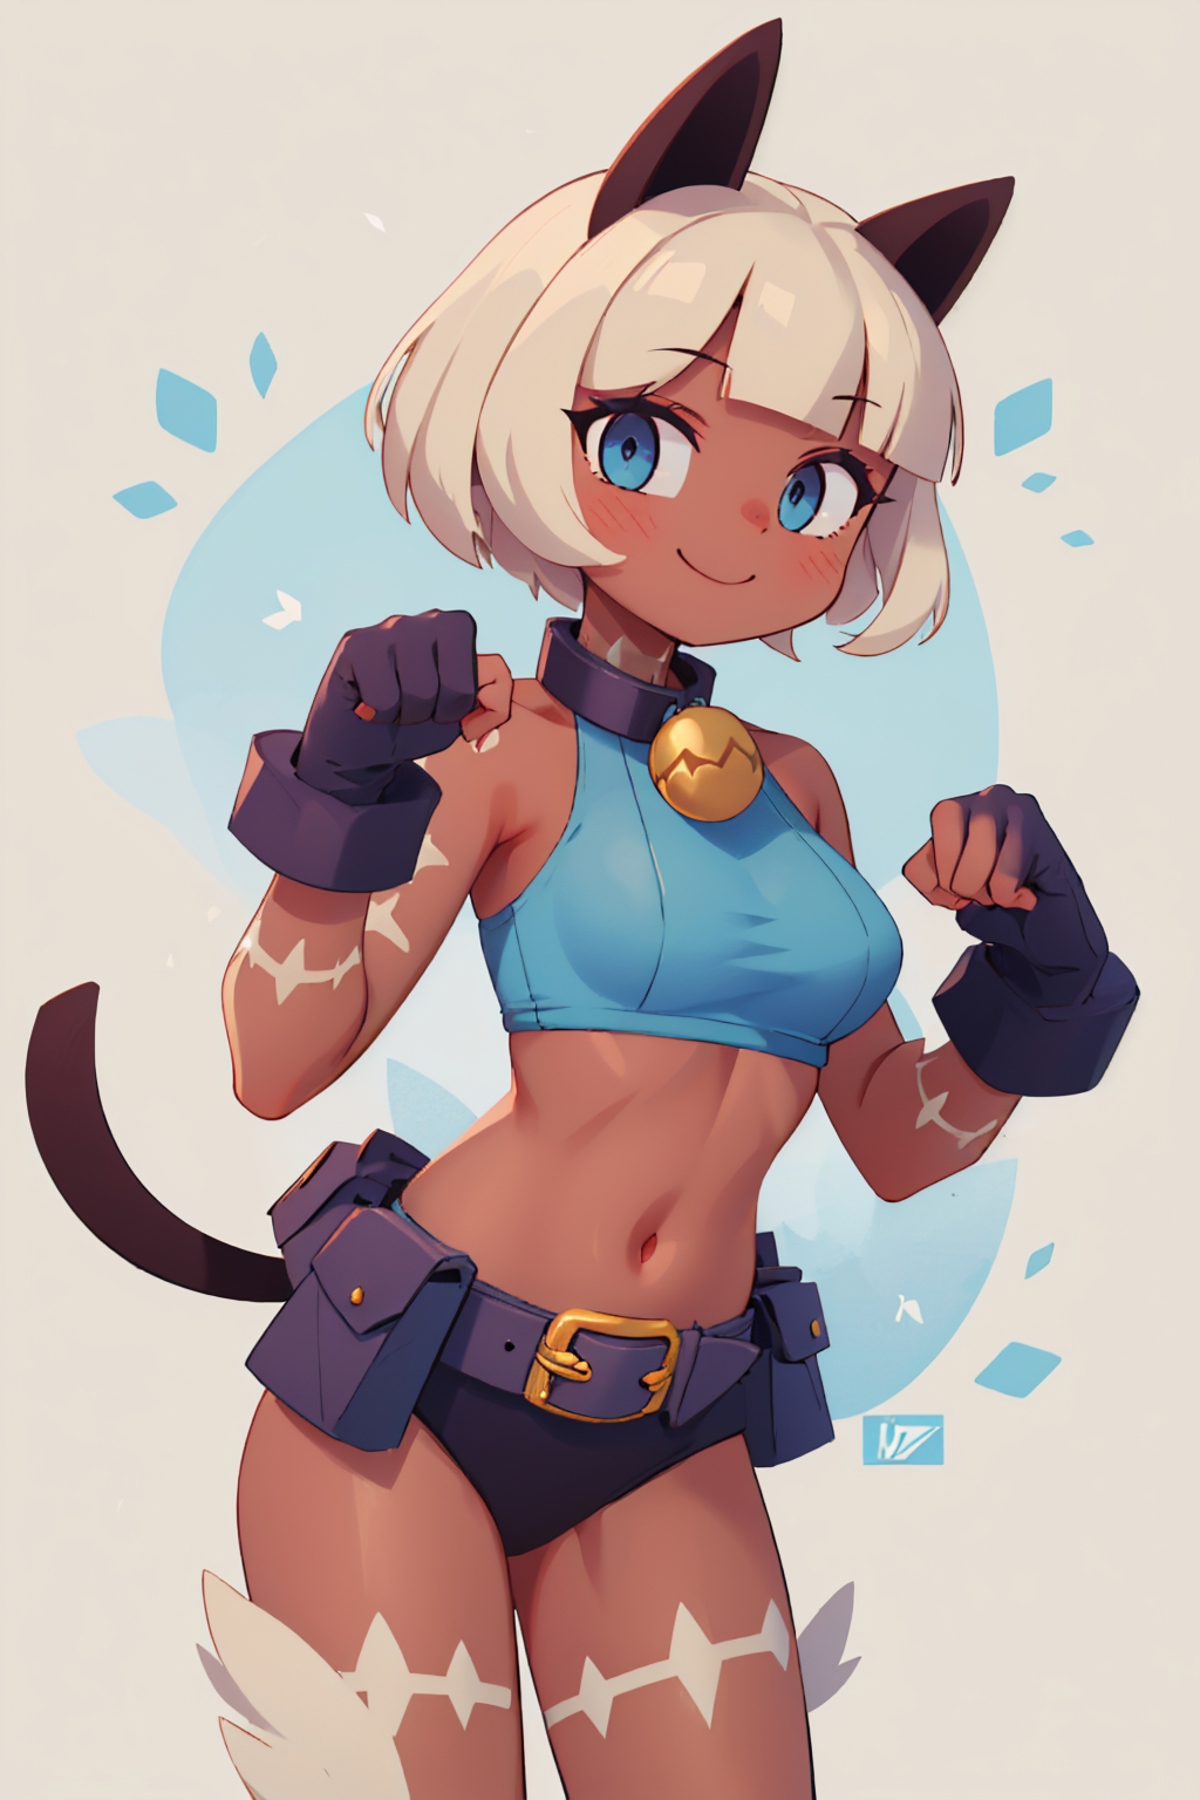 Ms. Fortune | Skullgirls image by justTNP